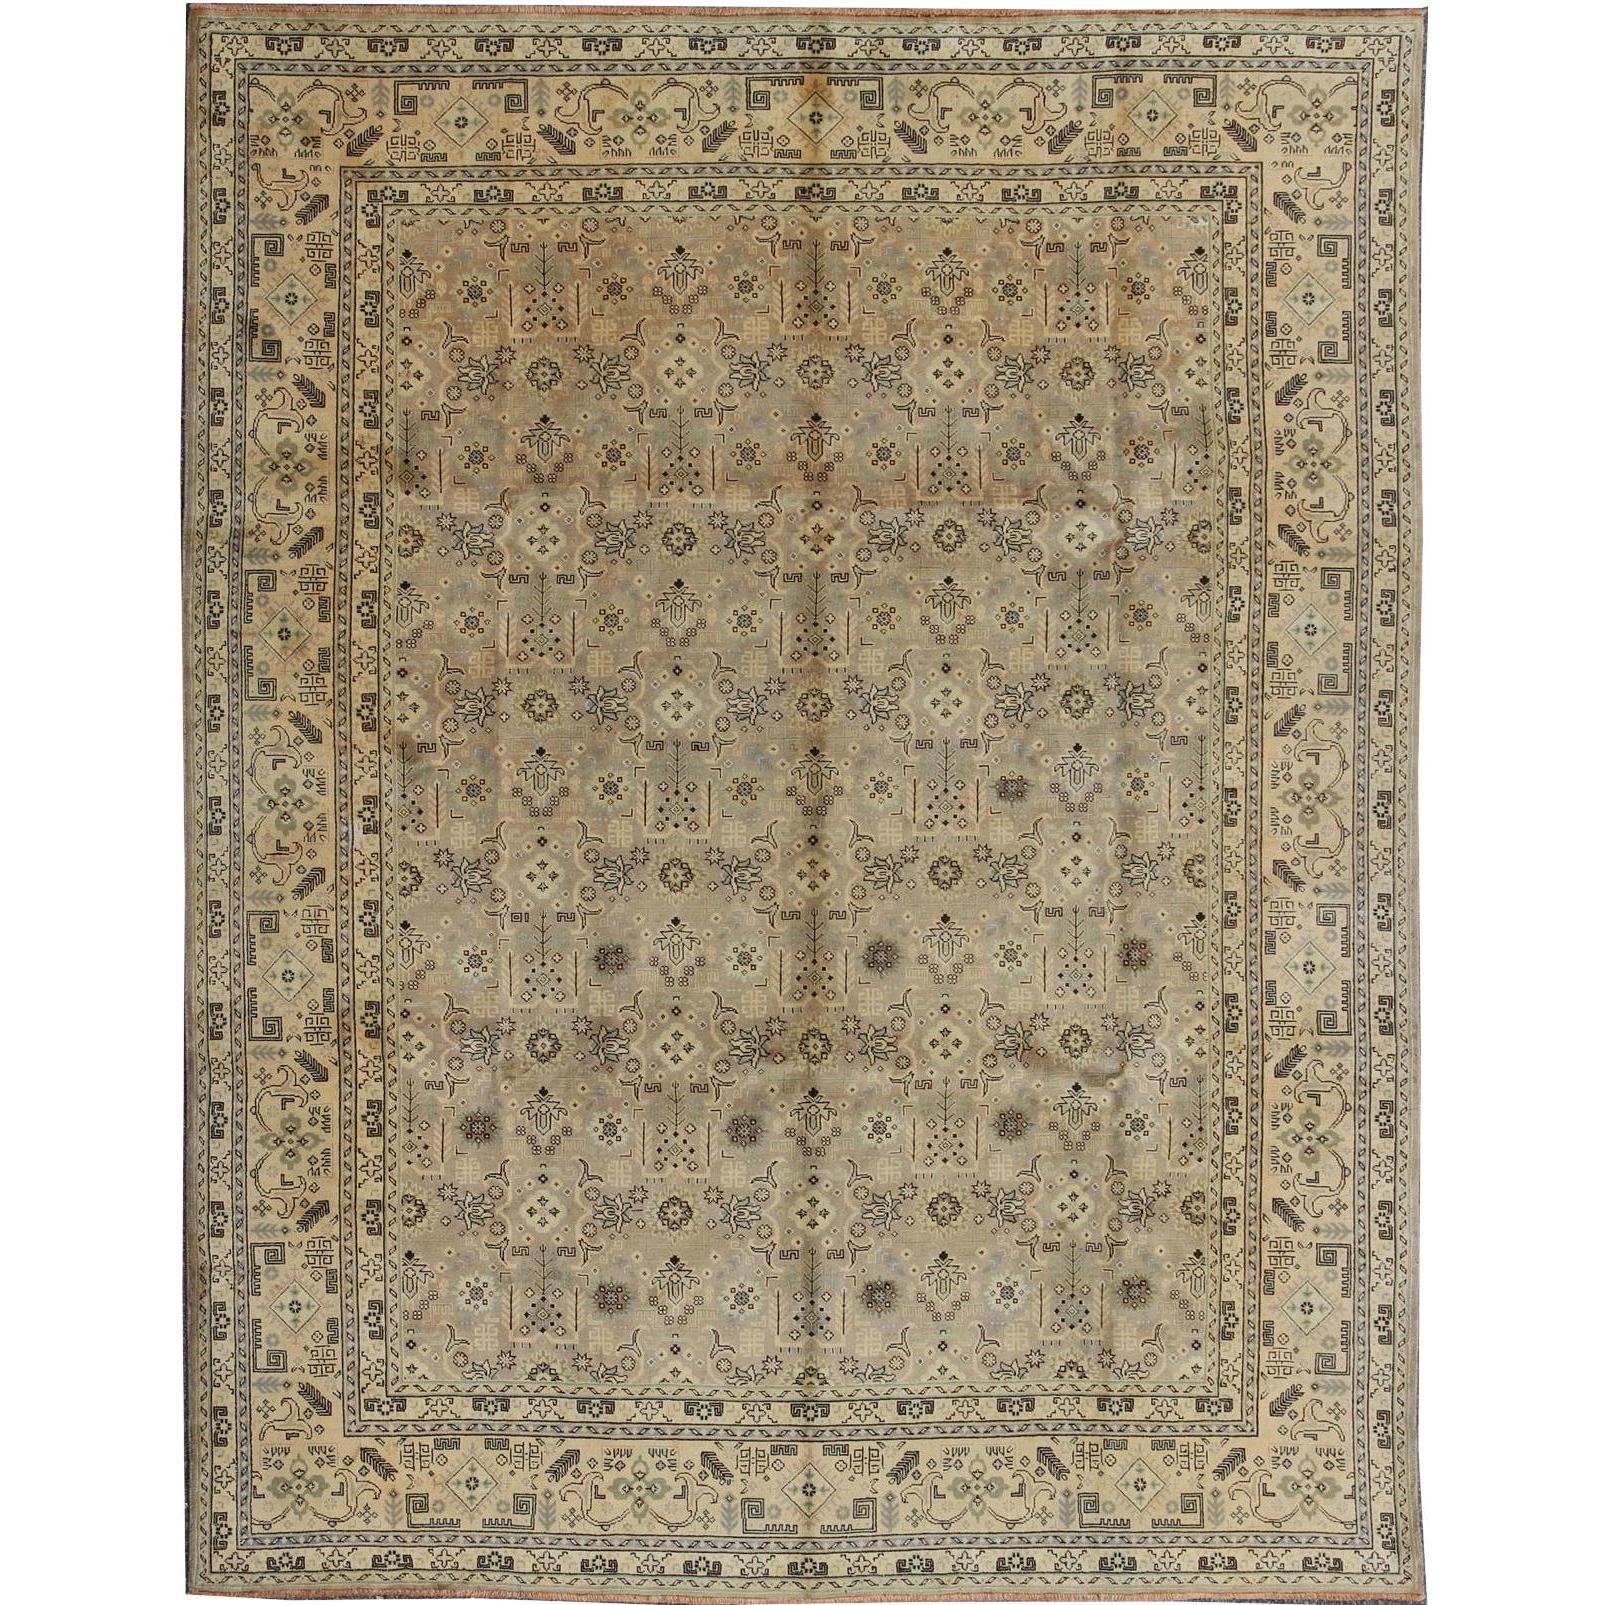 Vintage Persian Tabriz Rug with all over design in light colors